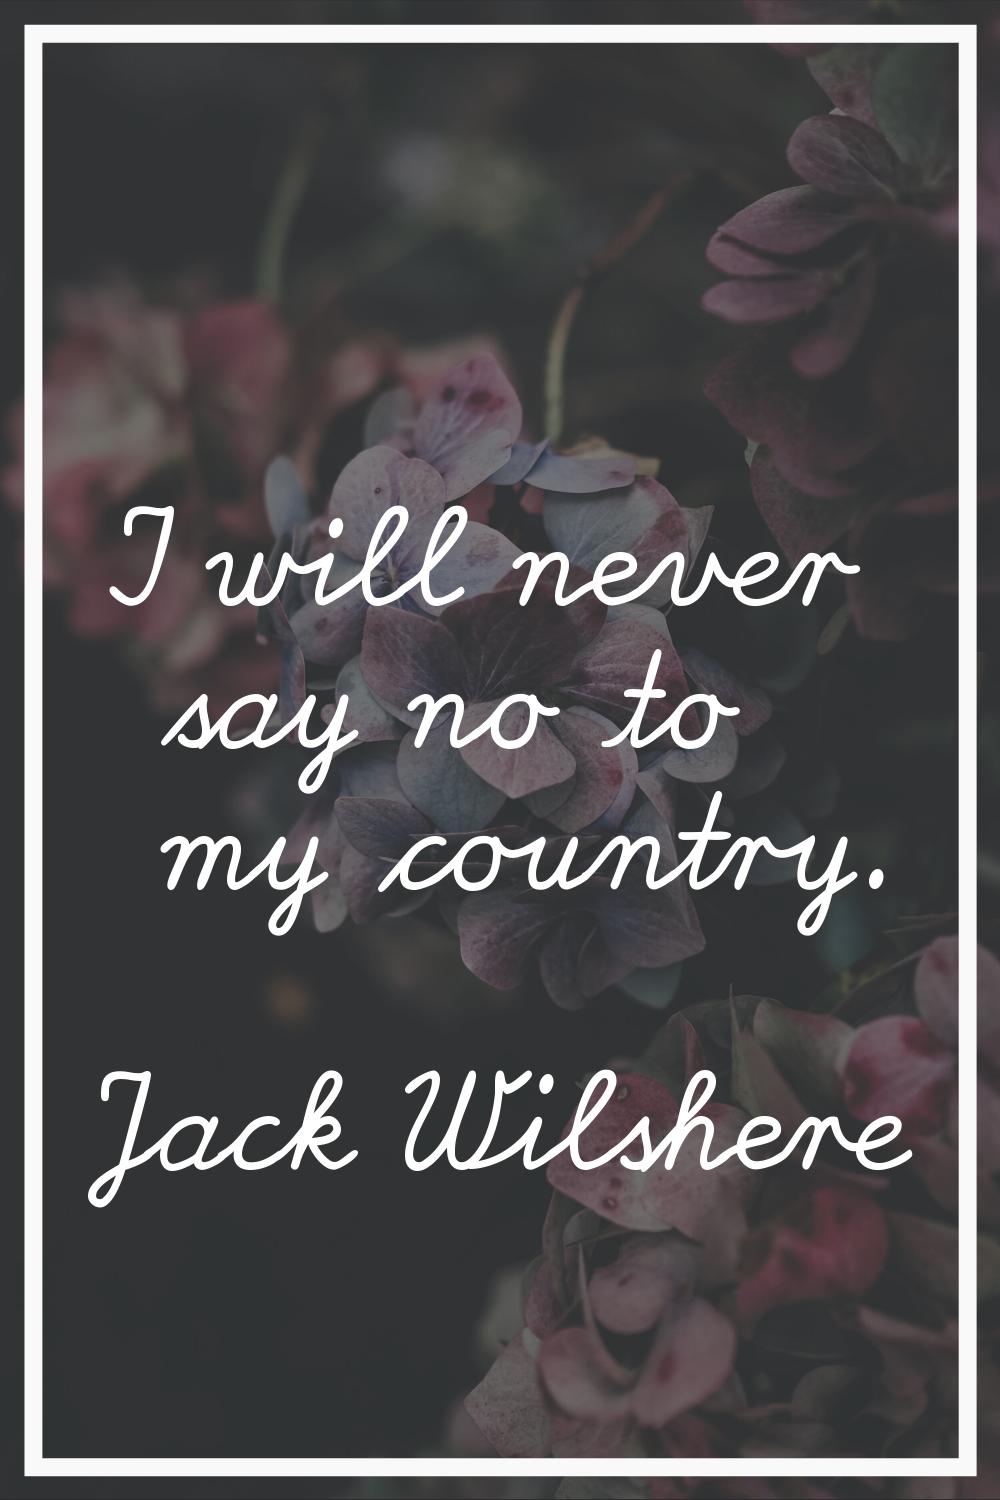 I will never say no to my country.